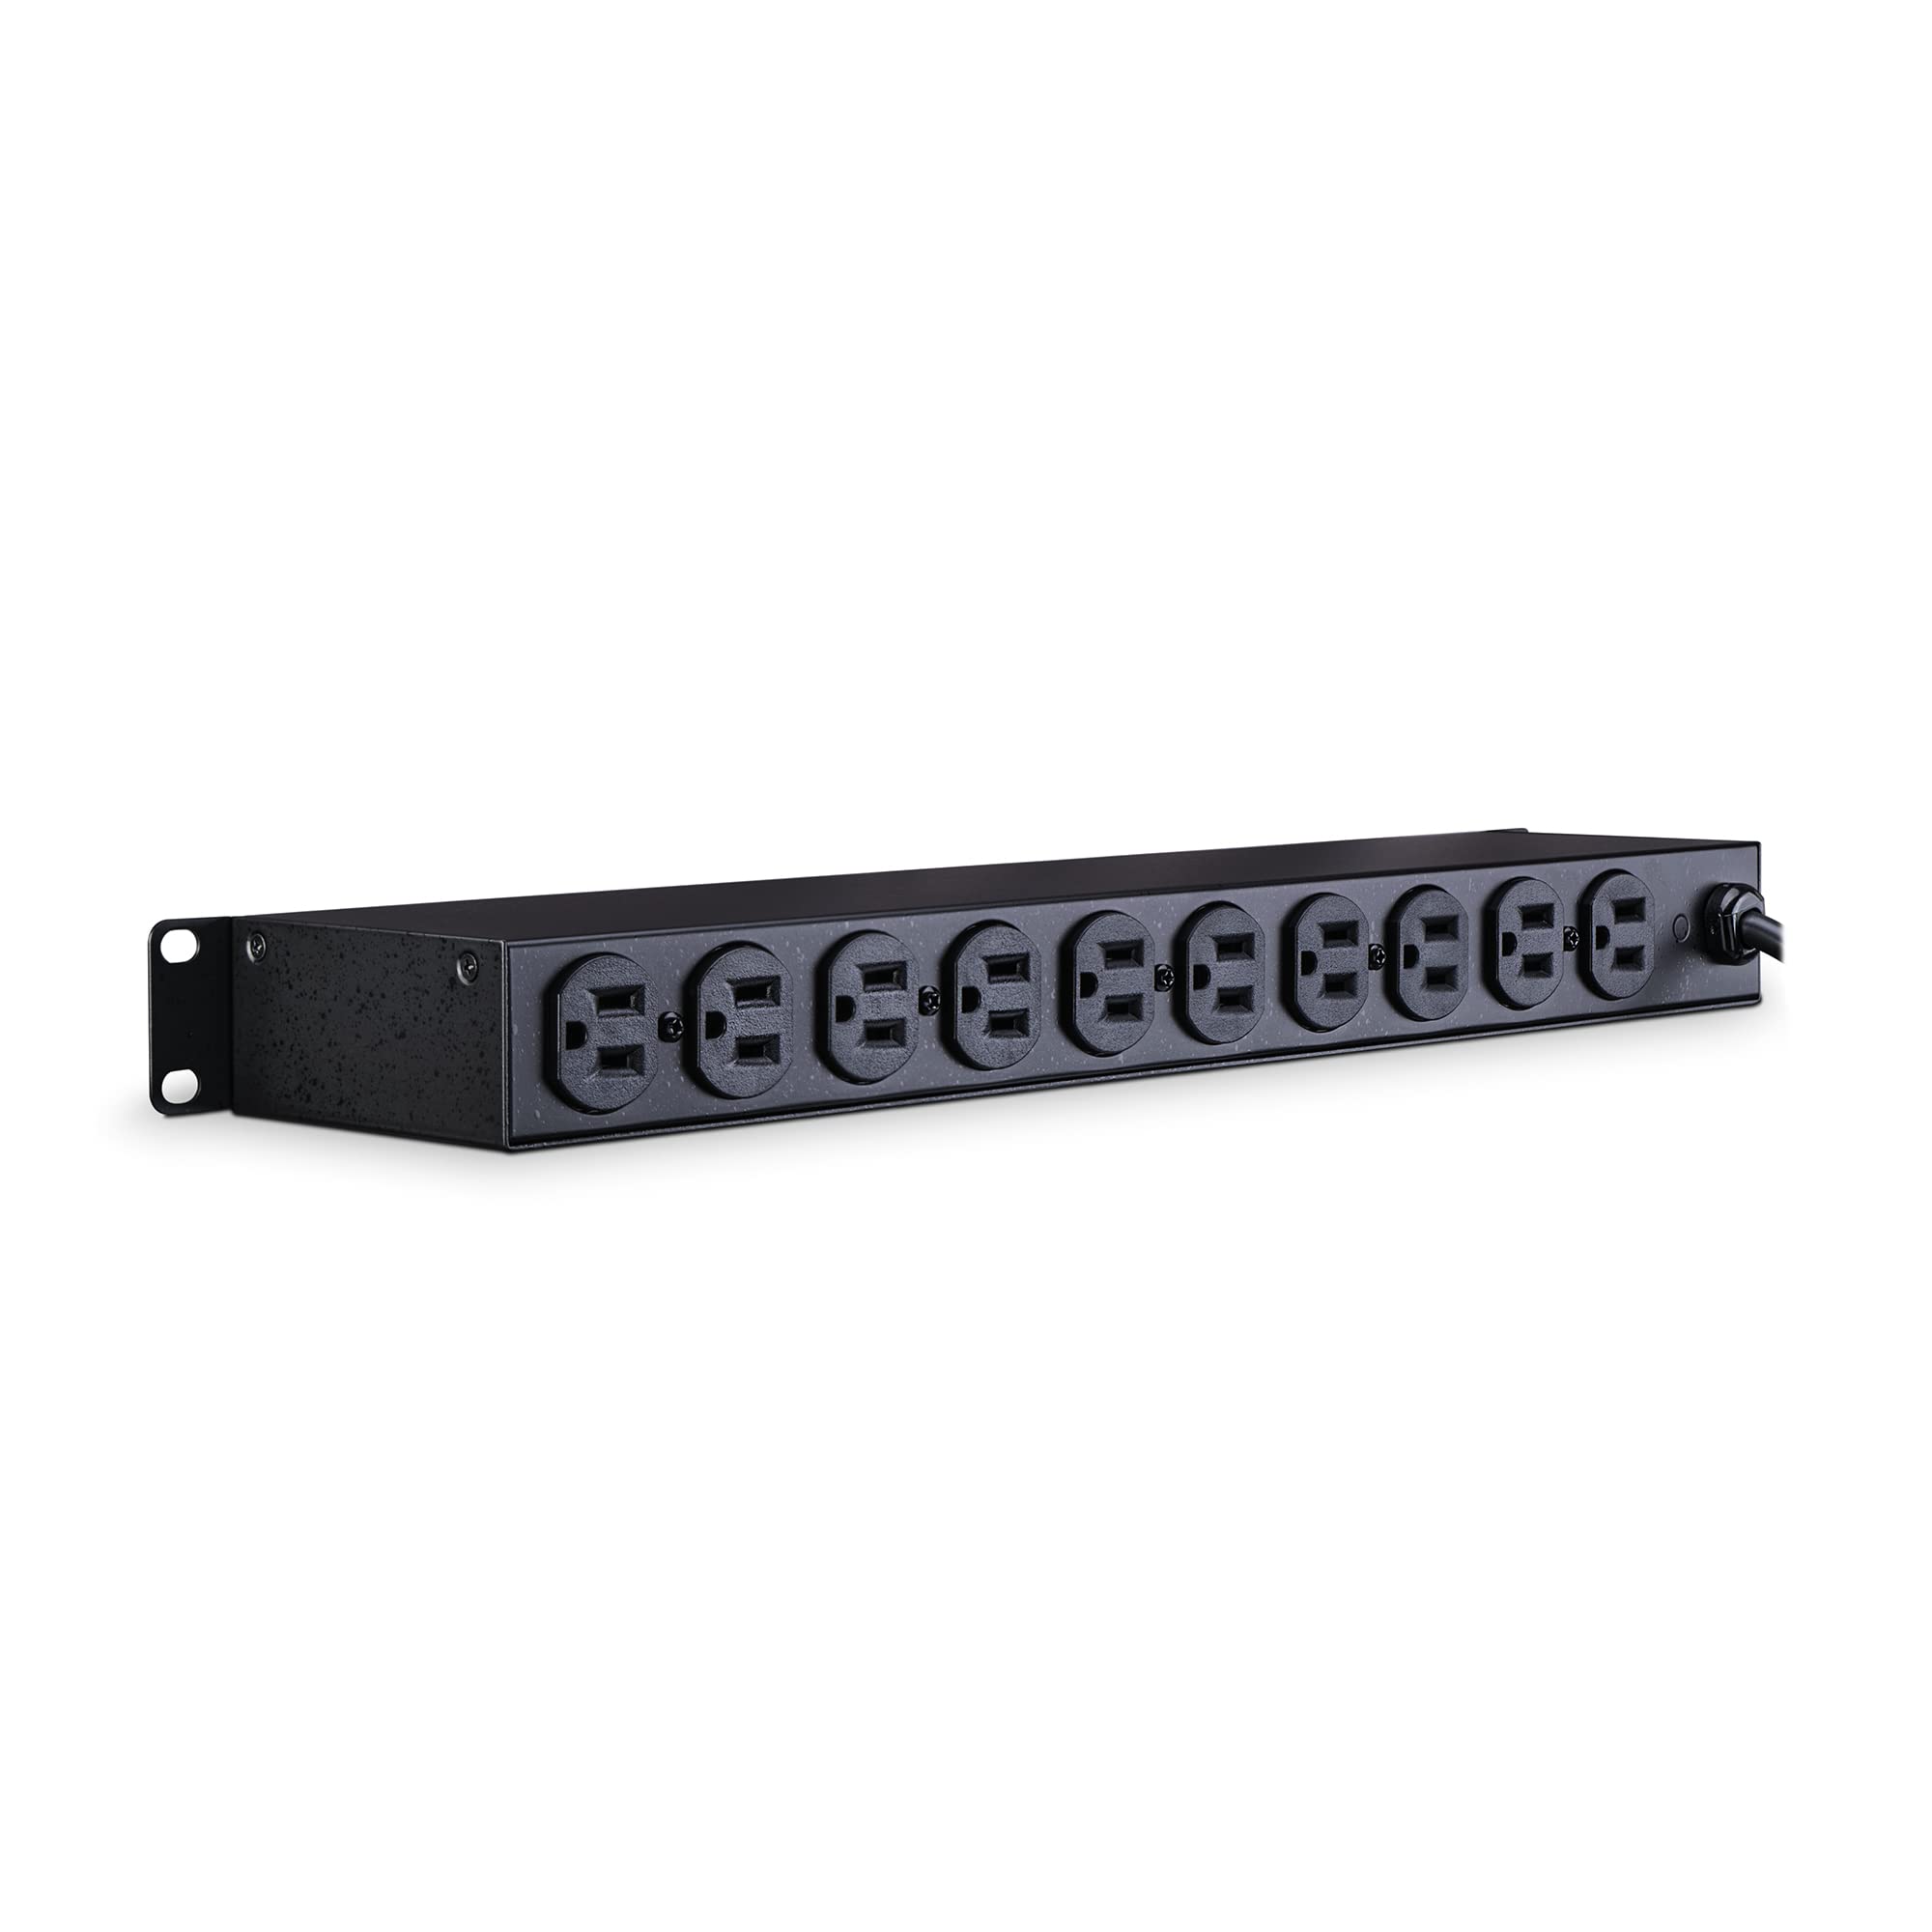 CyberPower CPS1215RM Basic PDU, 100-125V/15A, 10 Outlets, 15ft Power Cord, 1U Rackmount